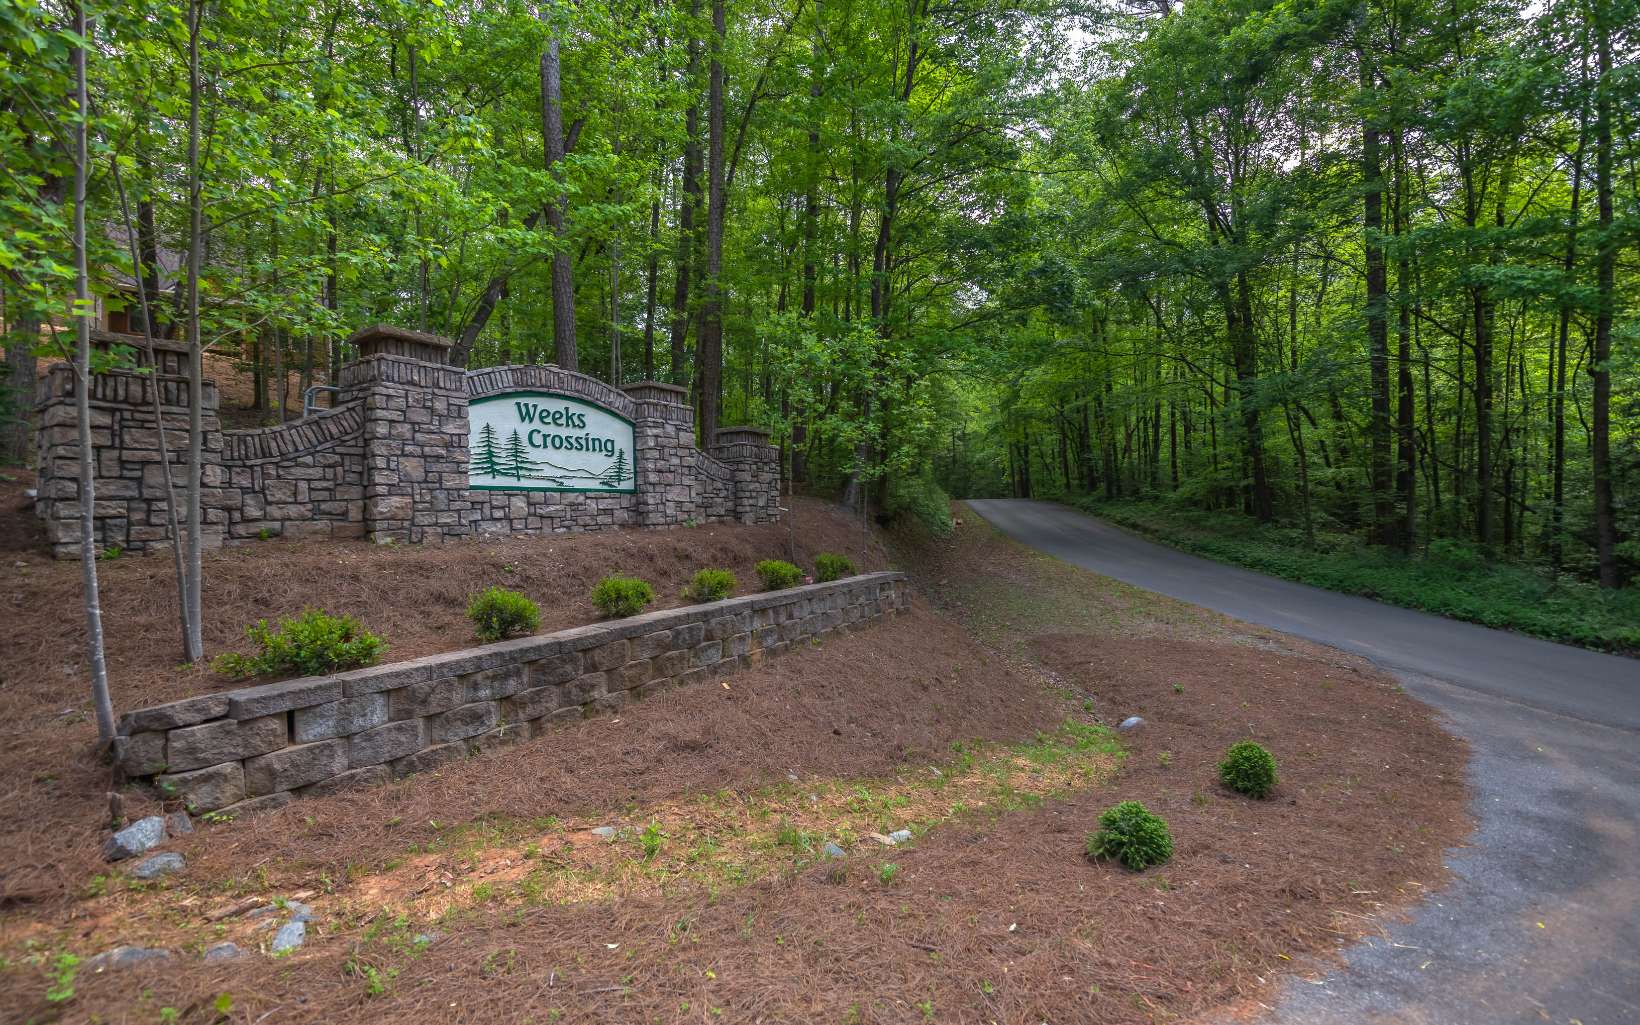 Come check this beautiful seasonal mountain view lot!!!! Less than 4 miles from town in the beautiful gated Weeks Crossing Subdivision, one of Ellijay's newest mountain community with fiber optic internet, paved roads, gated community. You will fall in love living here in the North Ga mountains with plenty of things to do.